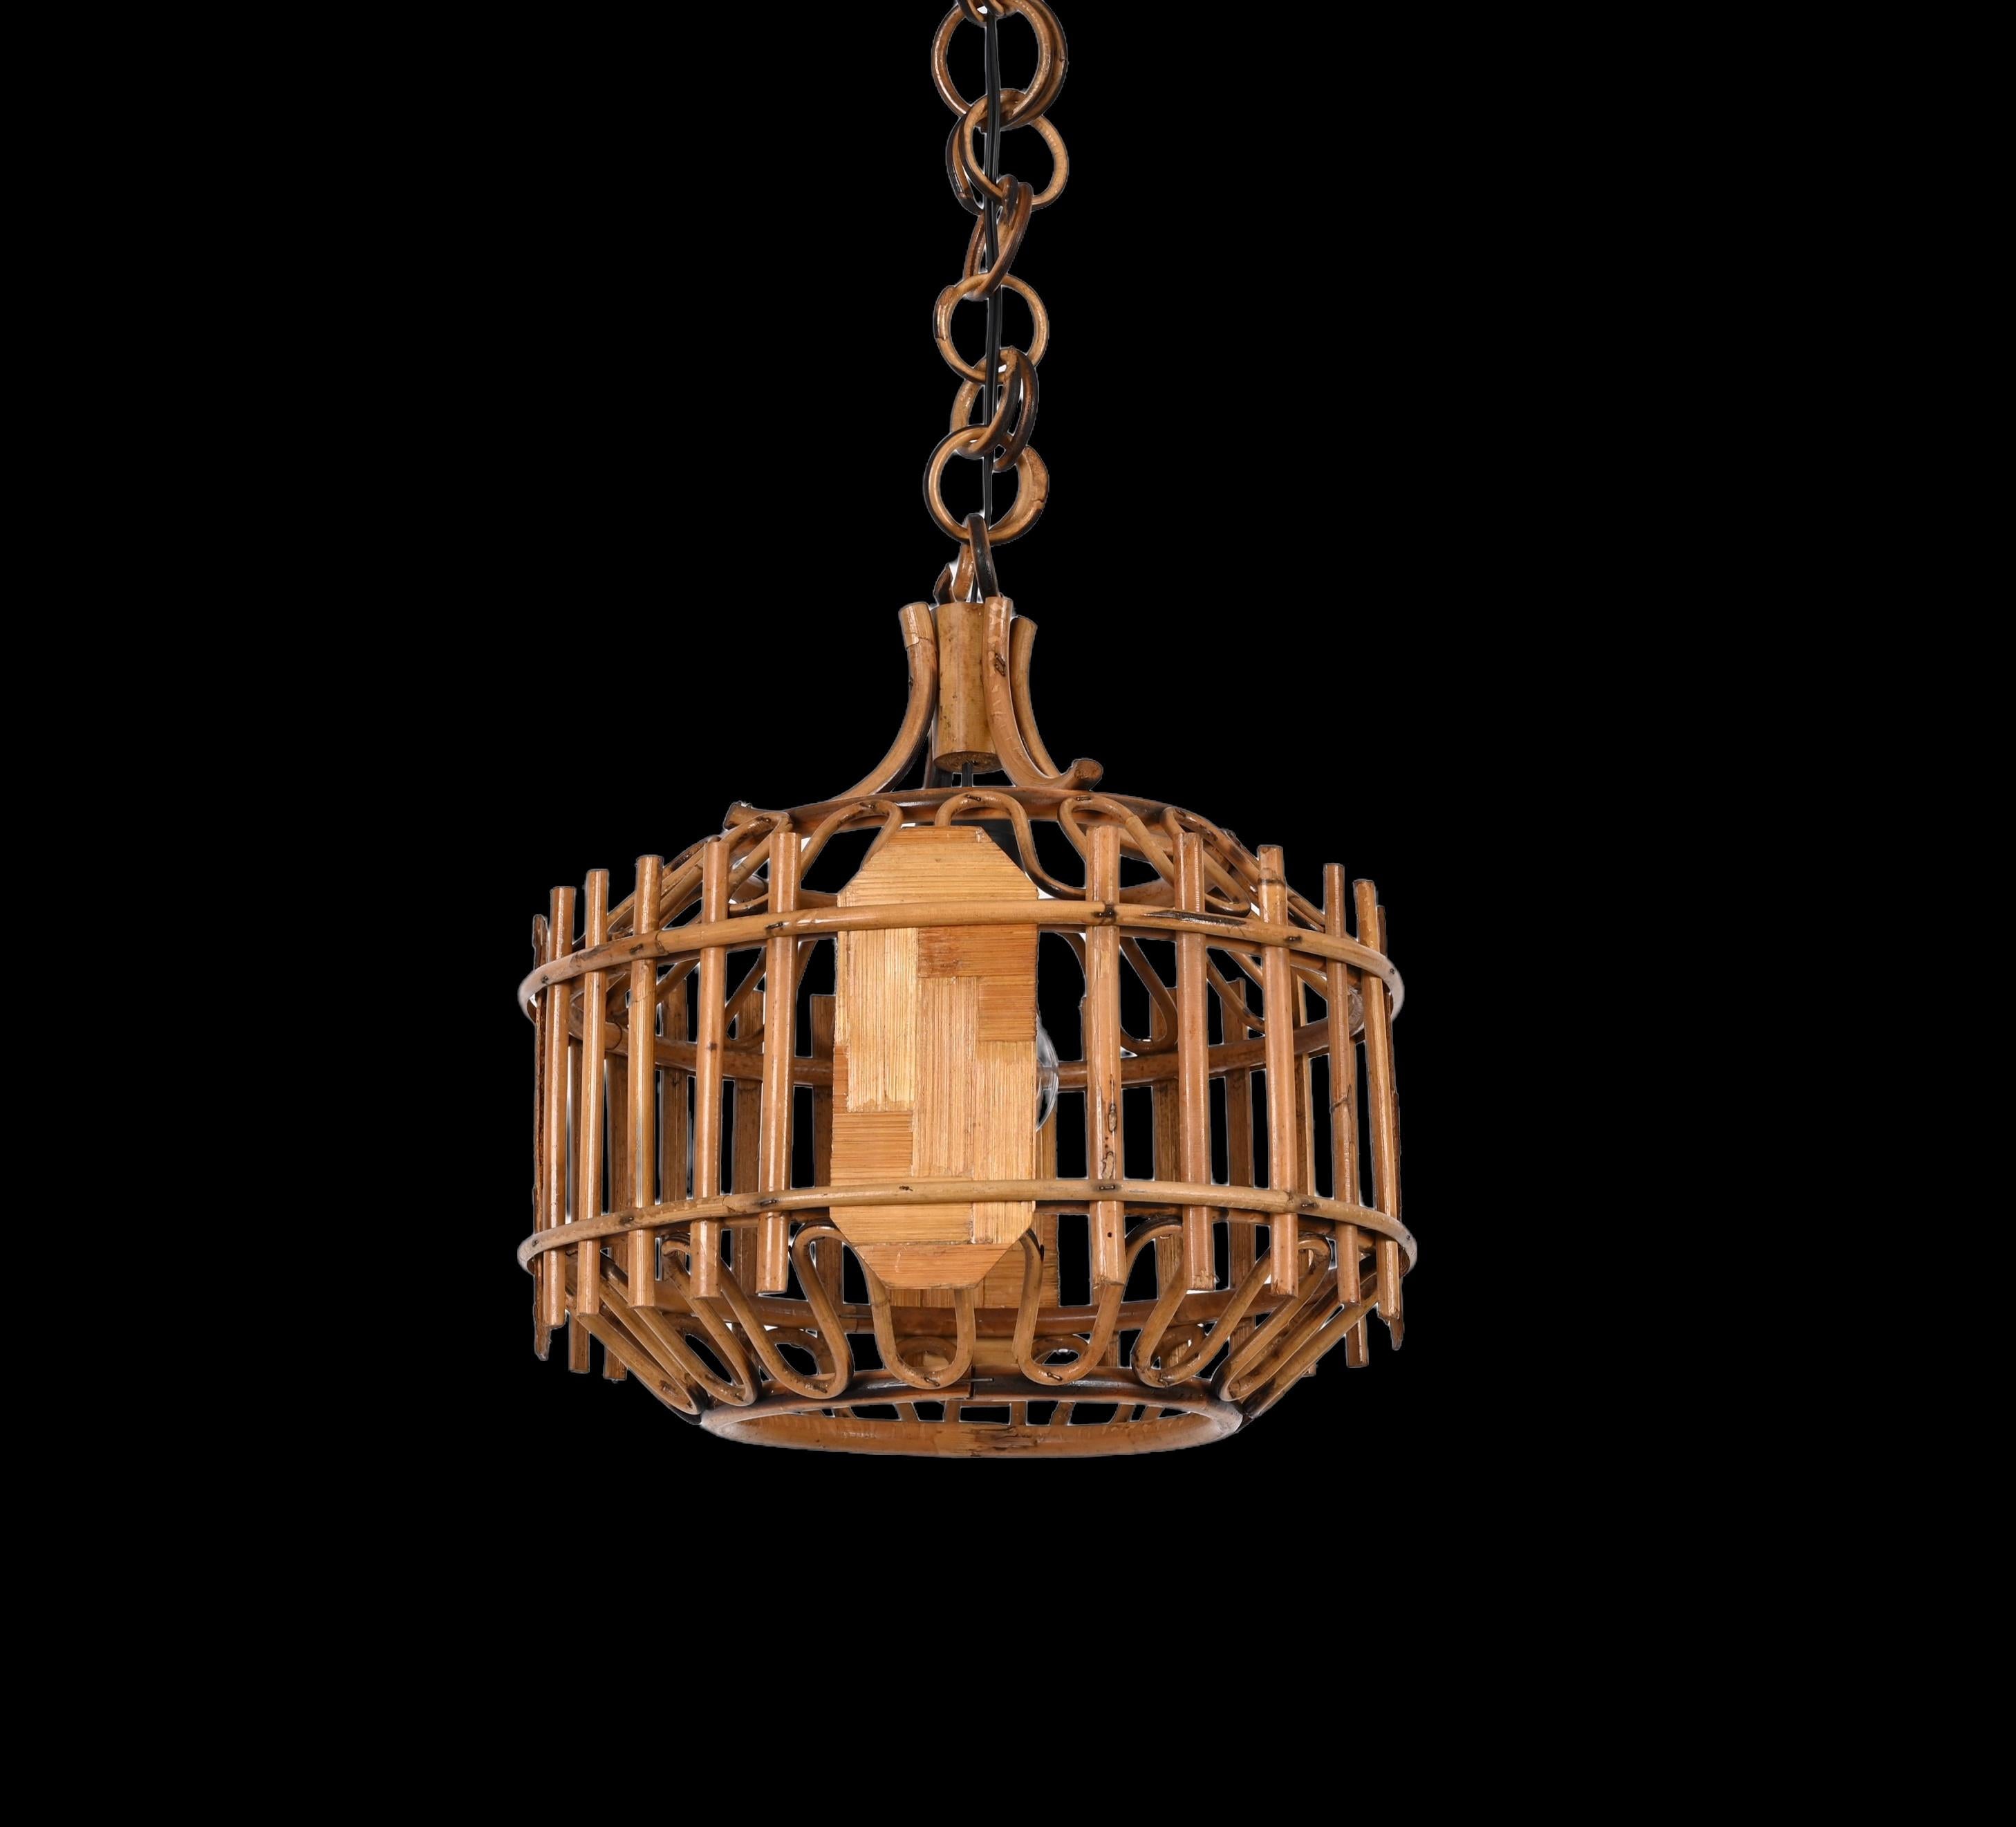 Midcentury French Riviera Bambo and Rattan Rounded Italian Chandelier, 1960s For Sale 11